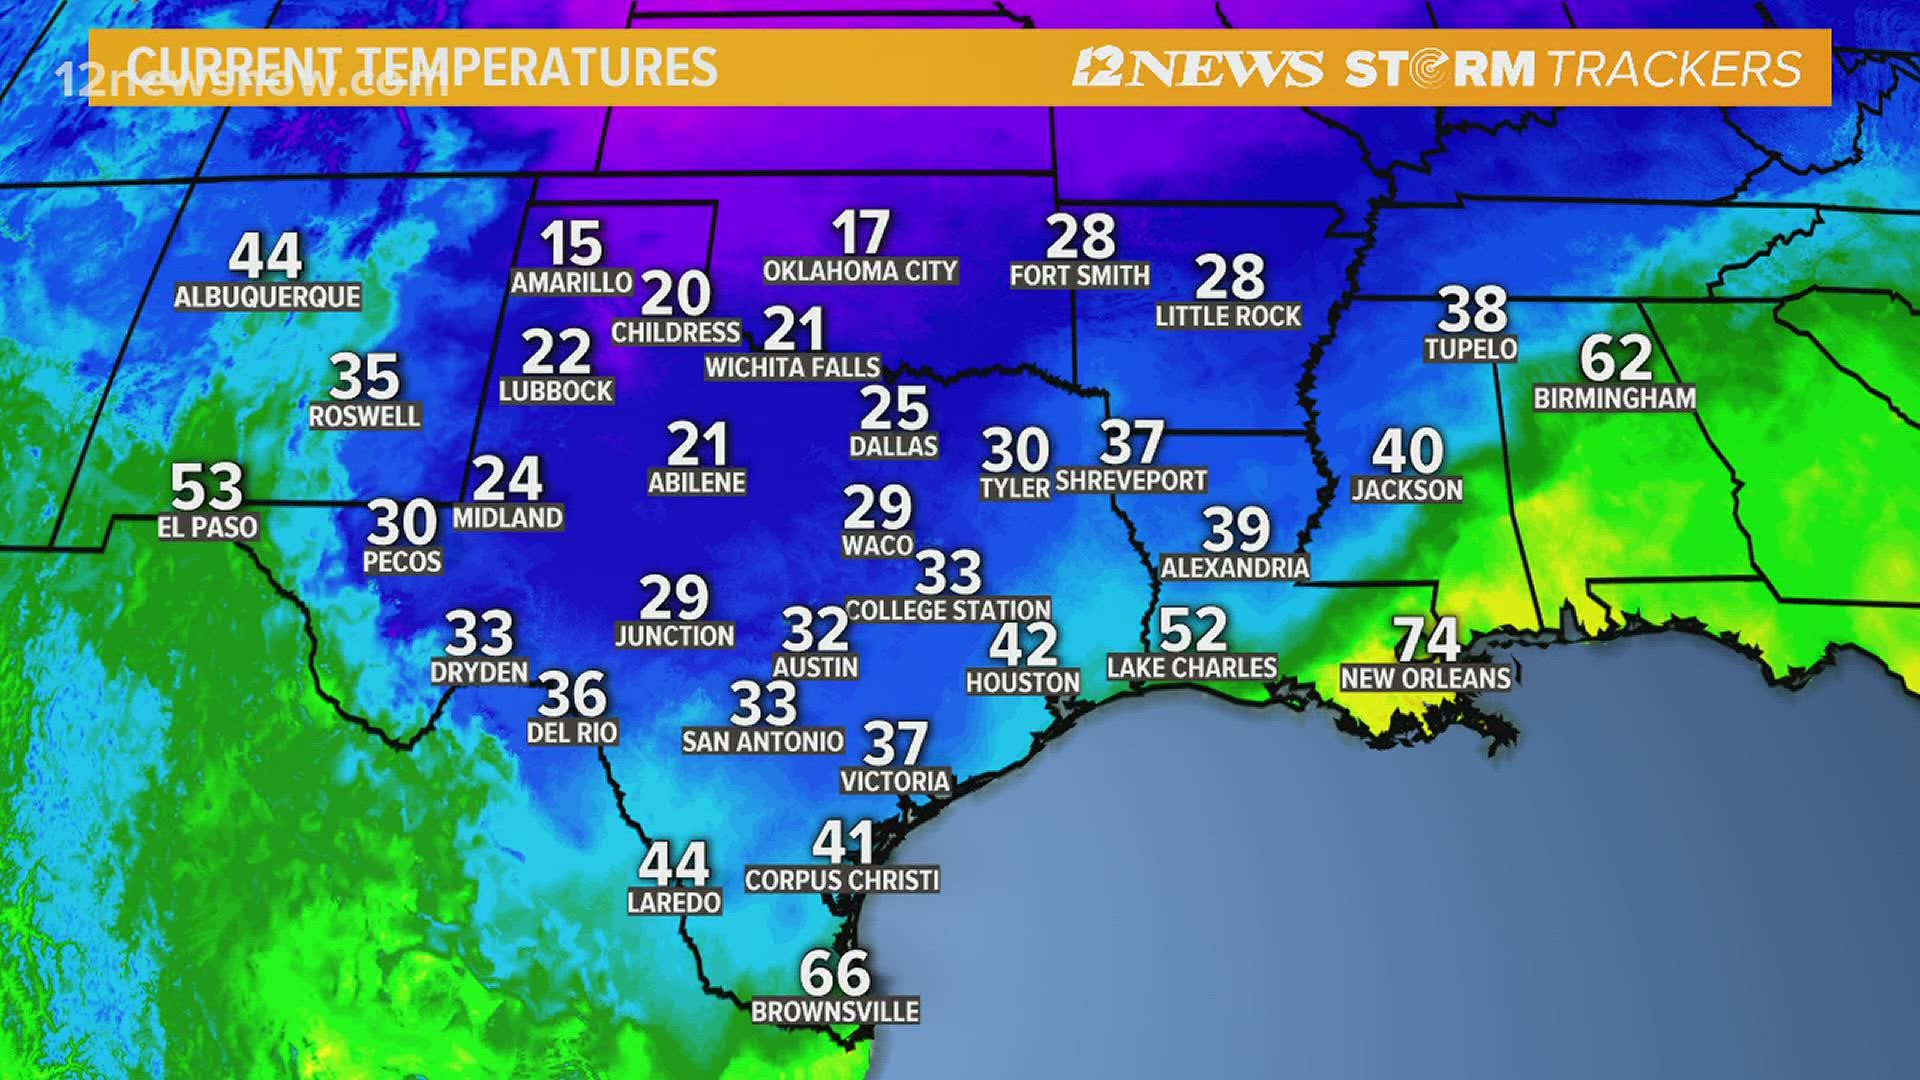 The 12News StormTrackers are closely monitoring an arctic cold front that is sweeping through Texas with high impacts likely for Southeast Texas.